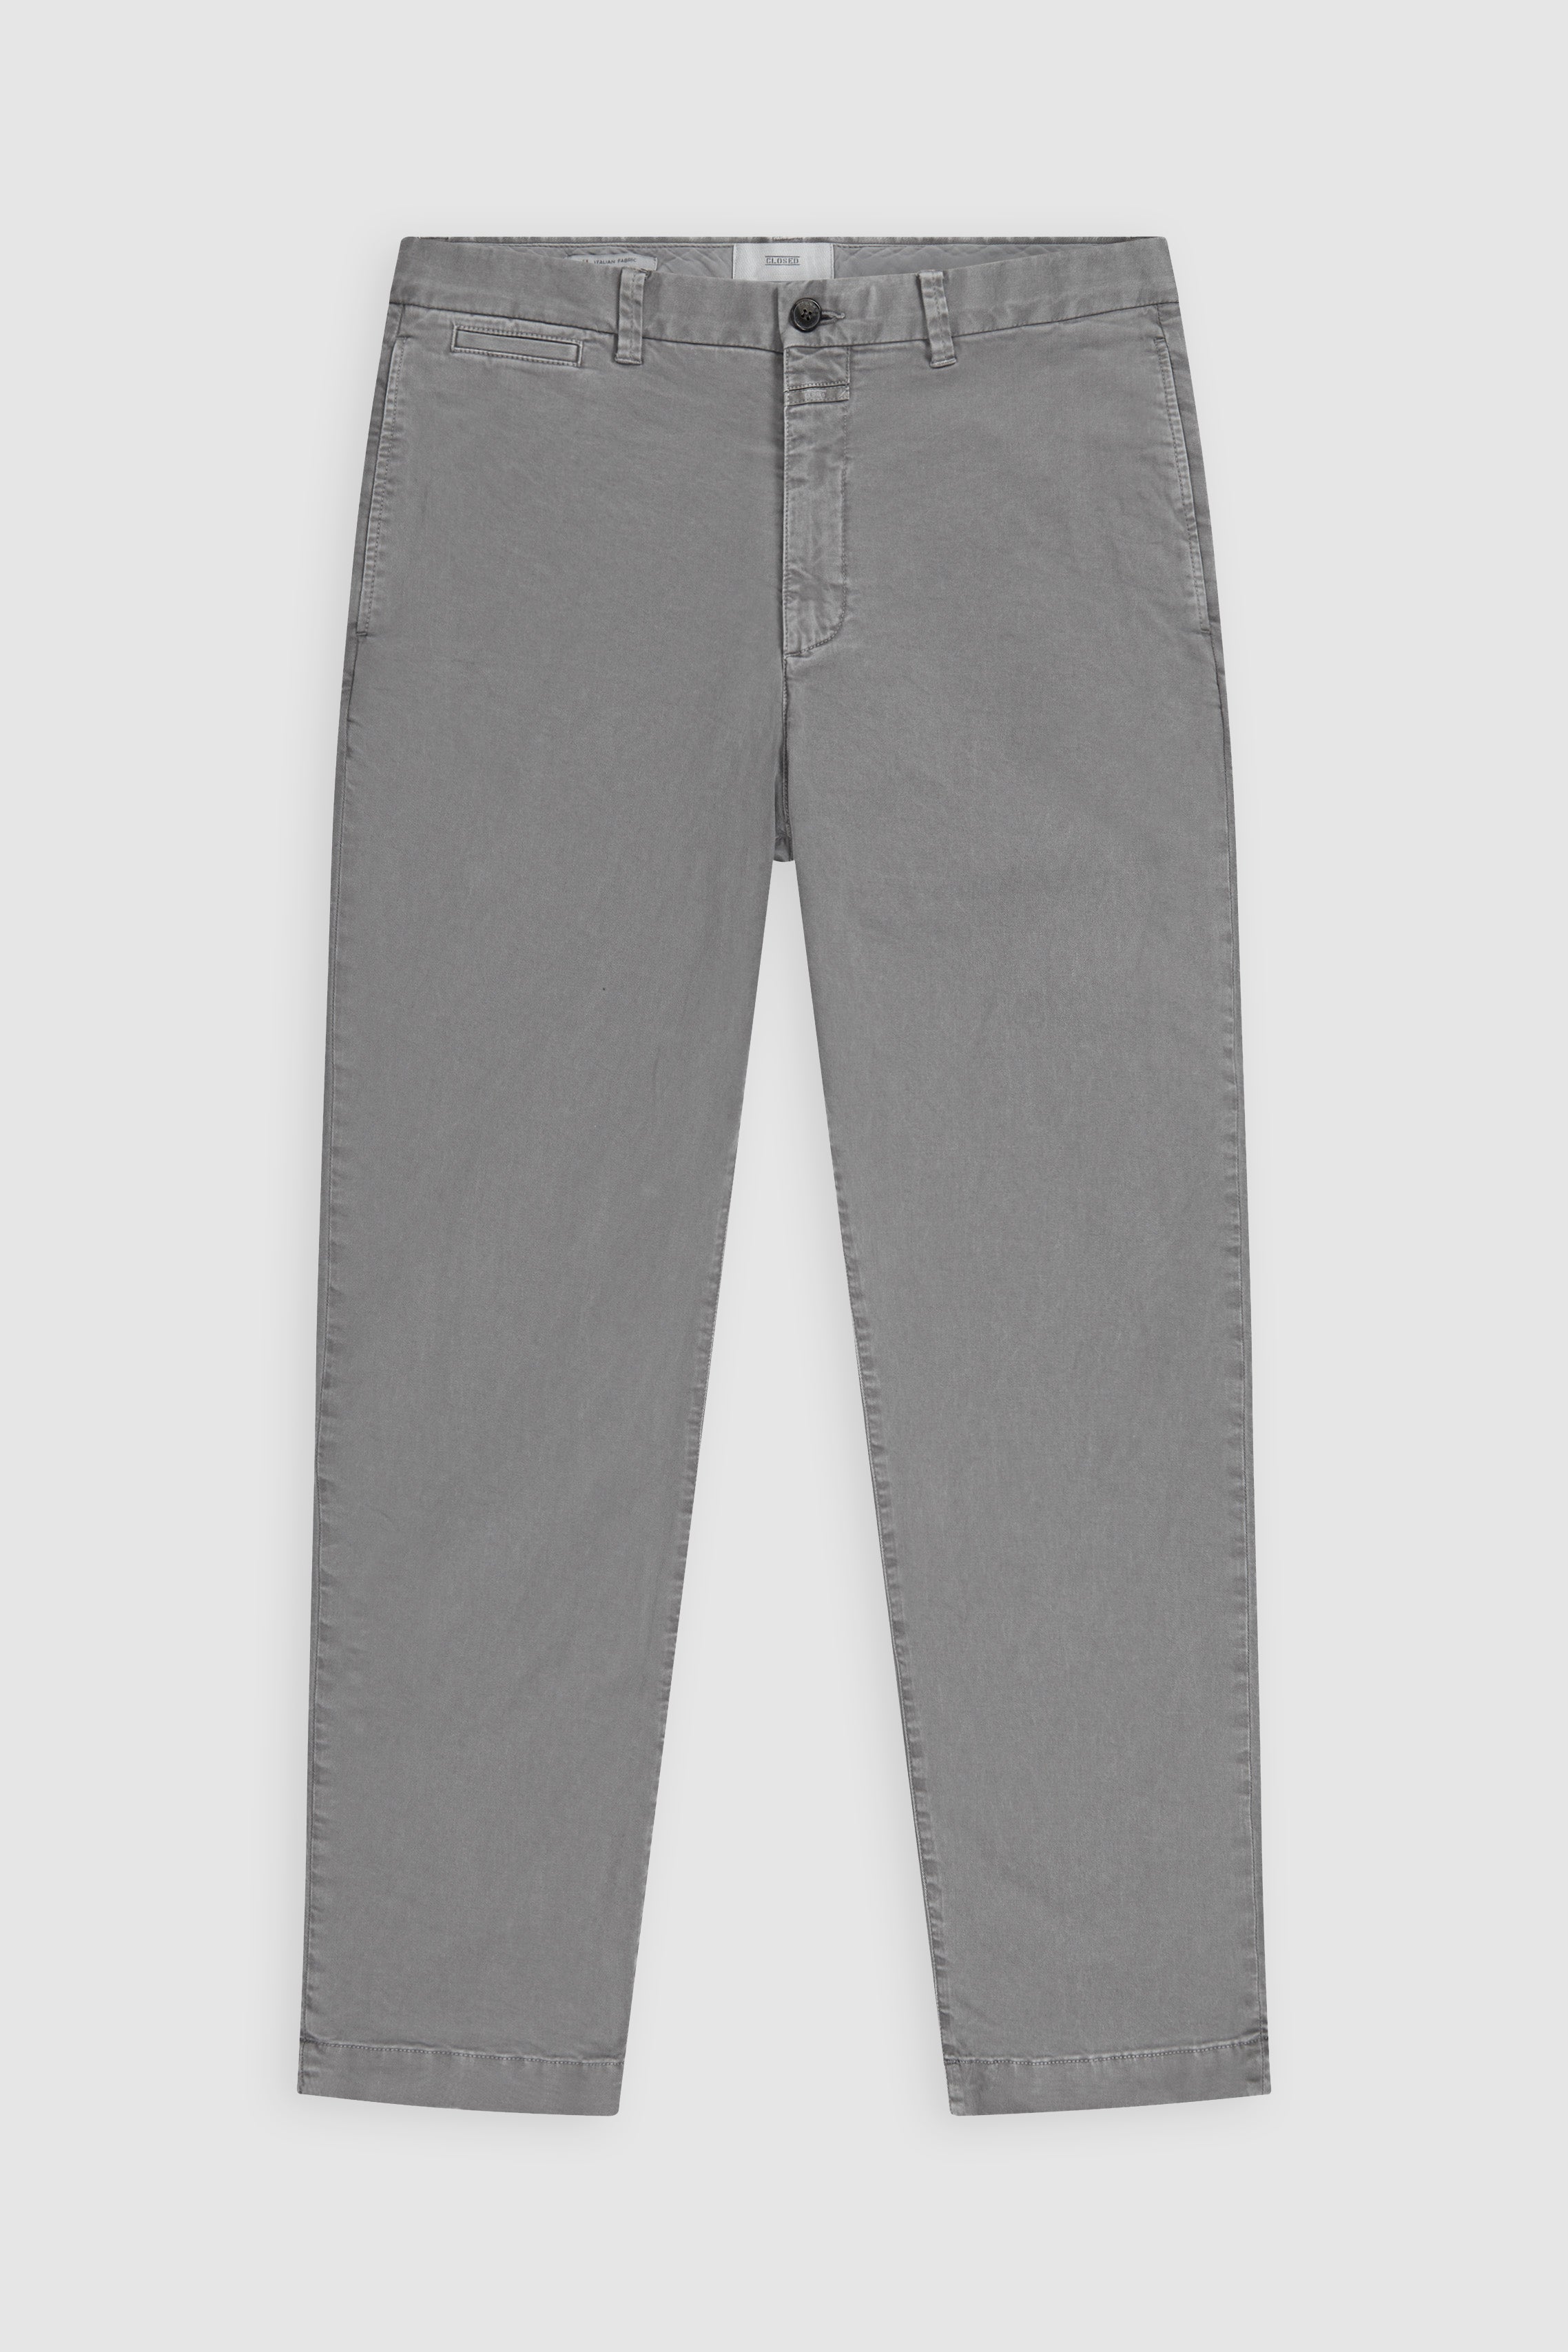 CLOSED-TACOMA TAPERED-Hosen-Outlet-Sale